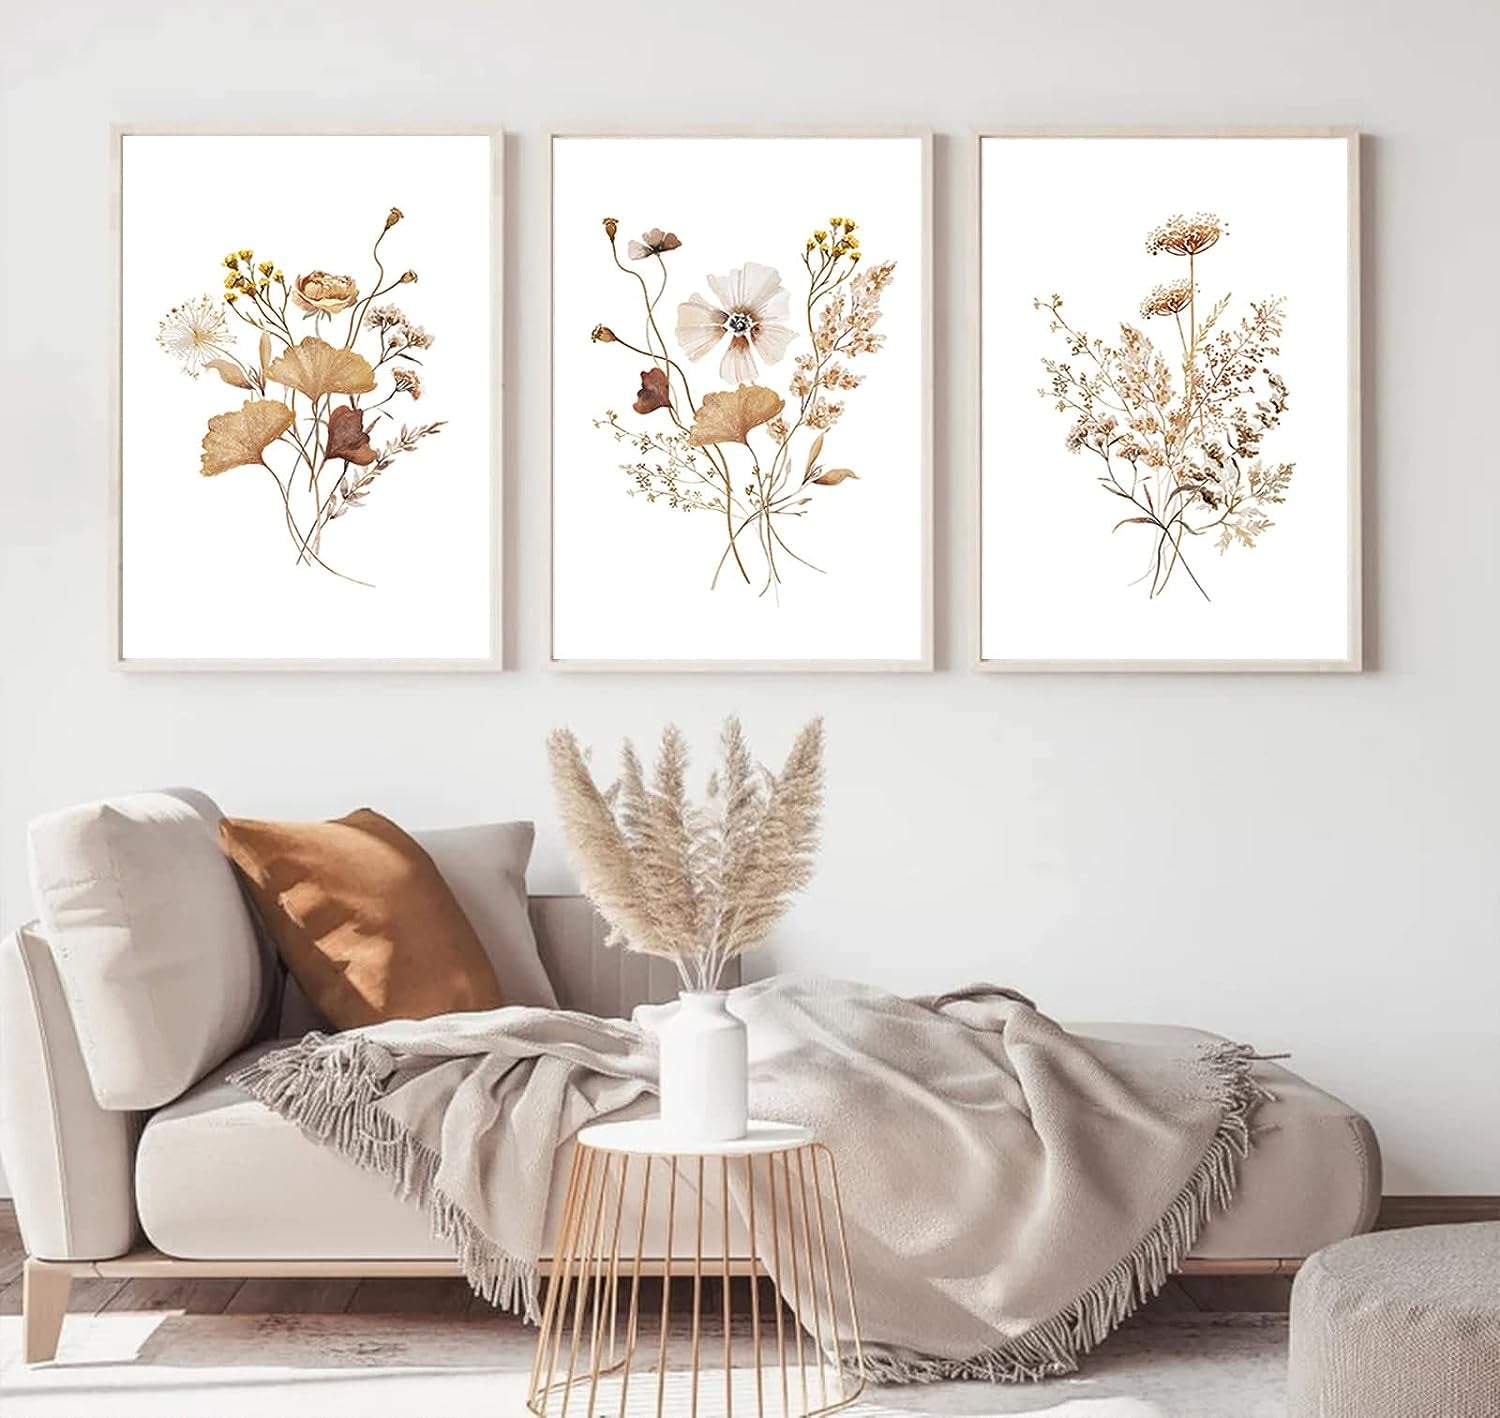 Watercolor Botanical Wall Art Vintage Floral Art Prints Wildflowers 16X24X3 Inch Set of 3 Unframed